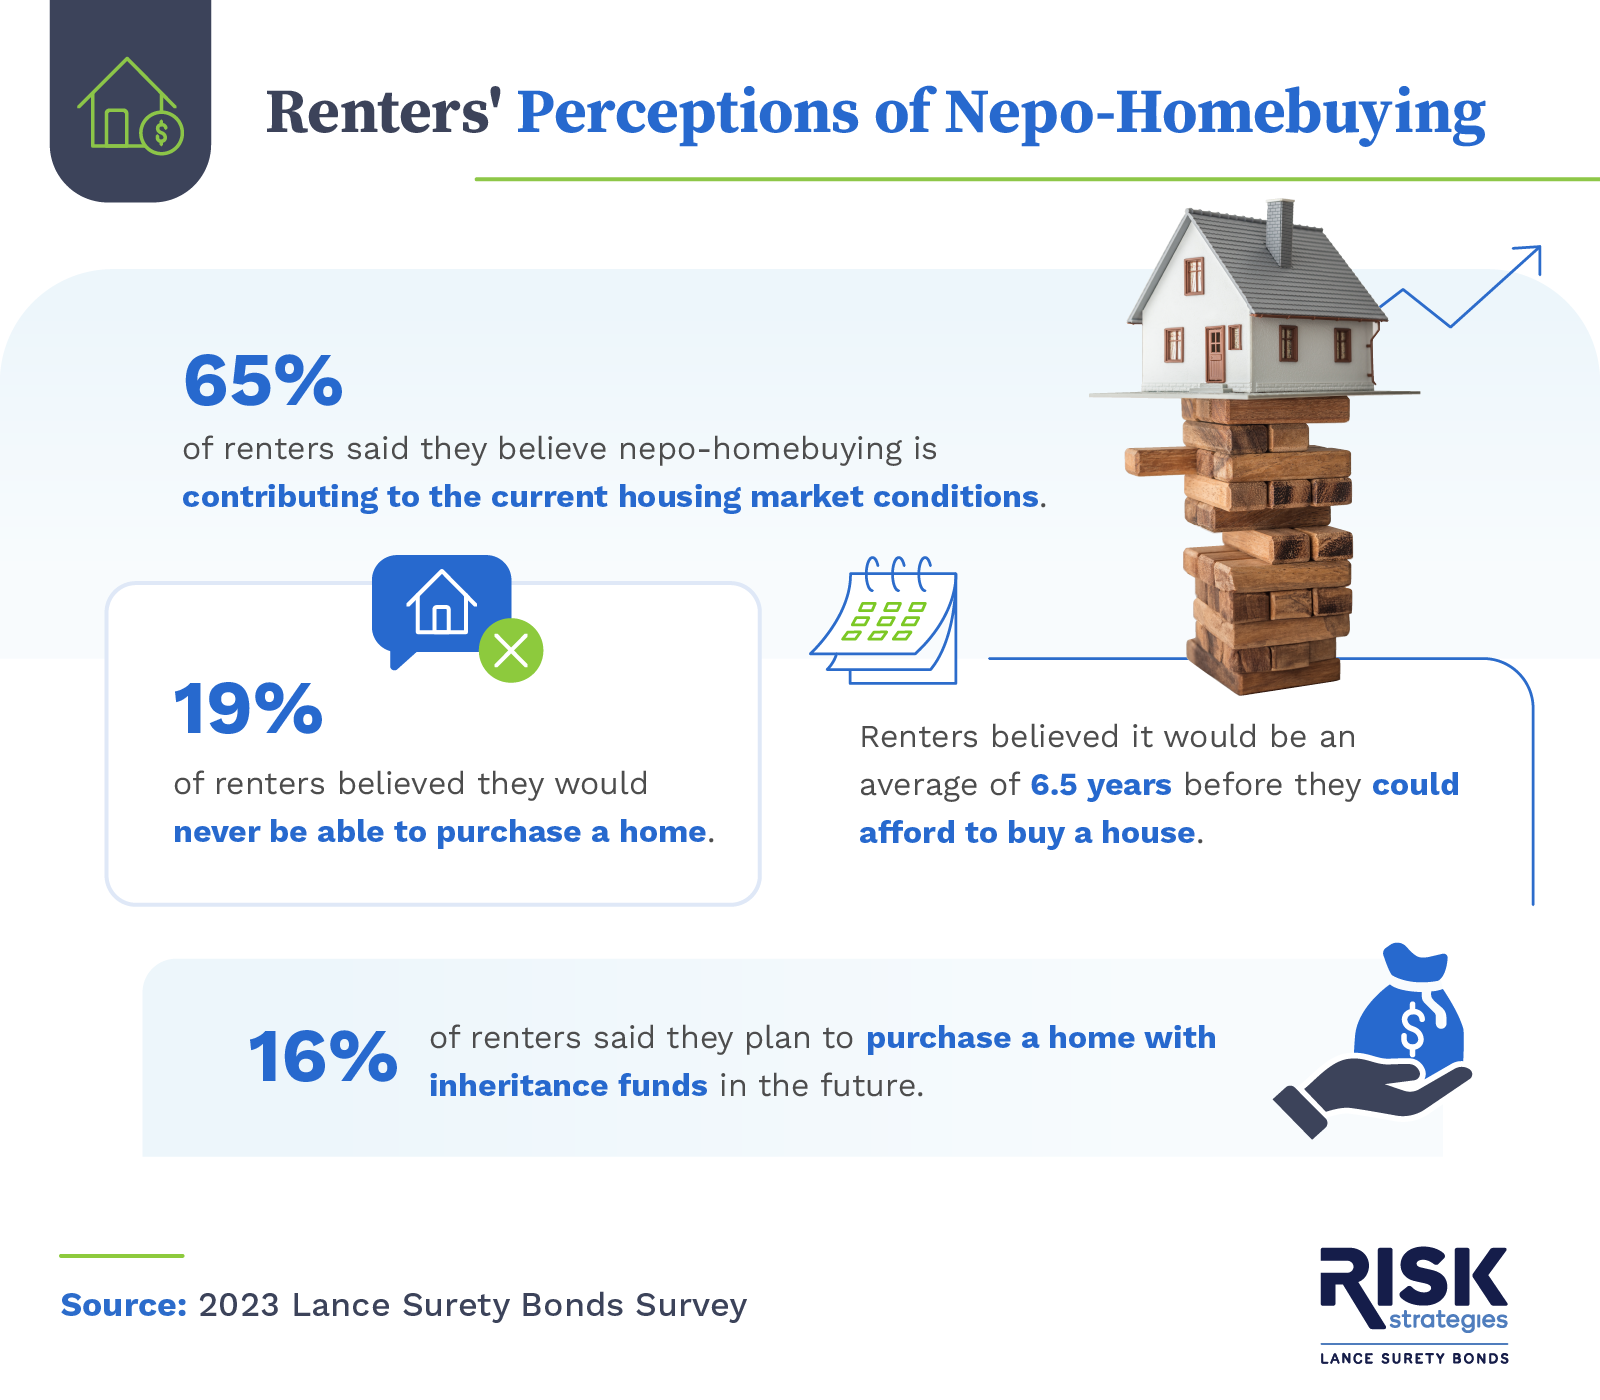 This infographic explores renters perceptions of nepo-homebuying